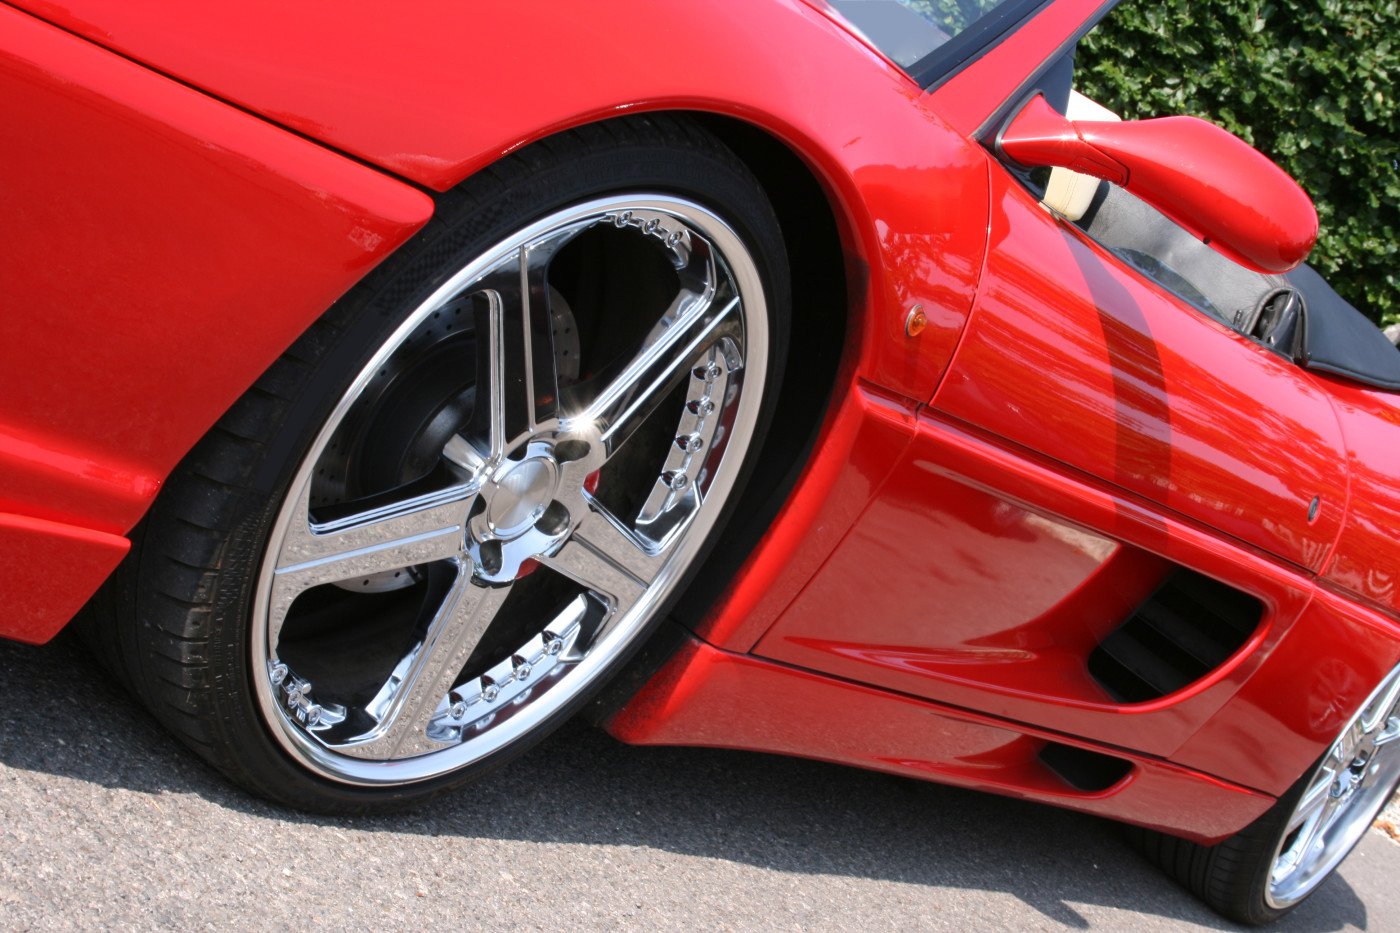 Custom Rims West Palm Beach FL – Improve your vehicle performance and safety with aftermarket rims.